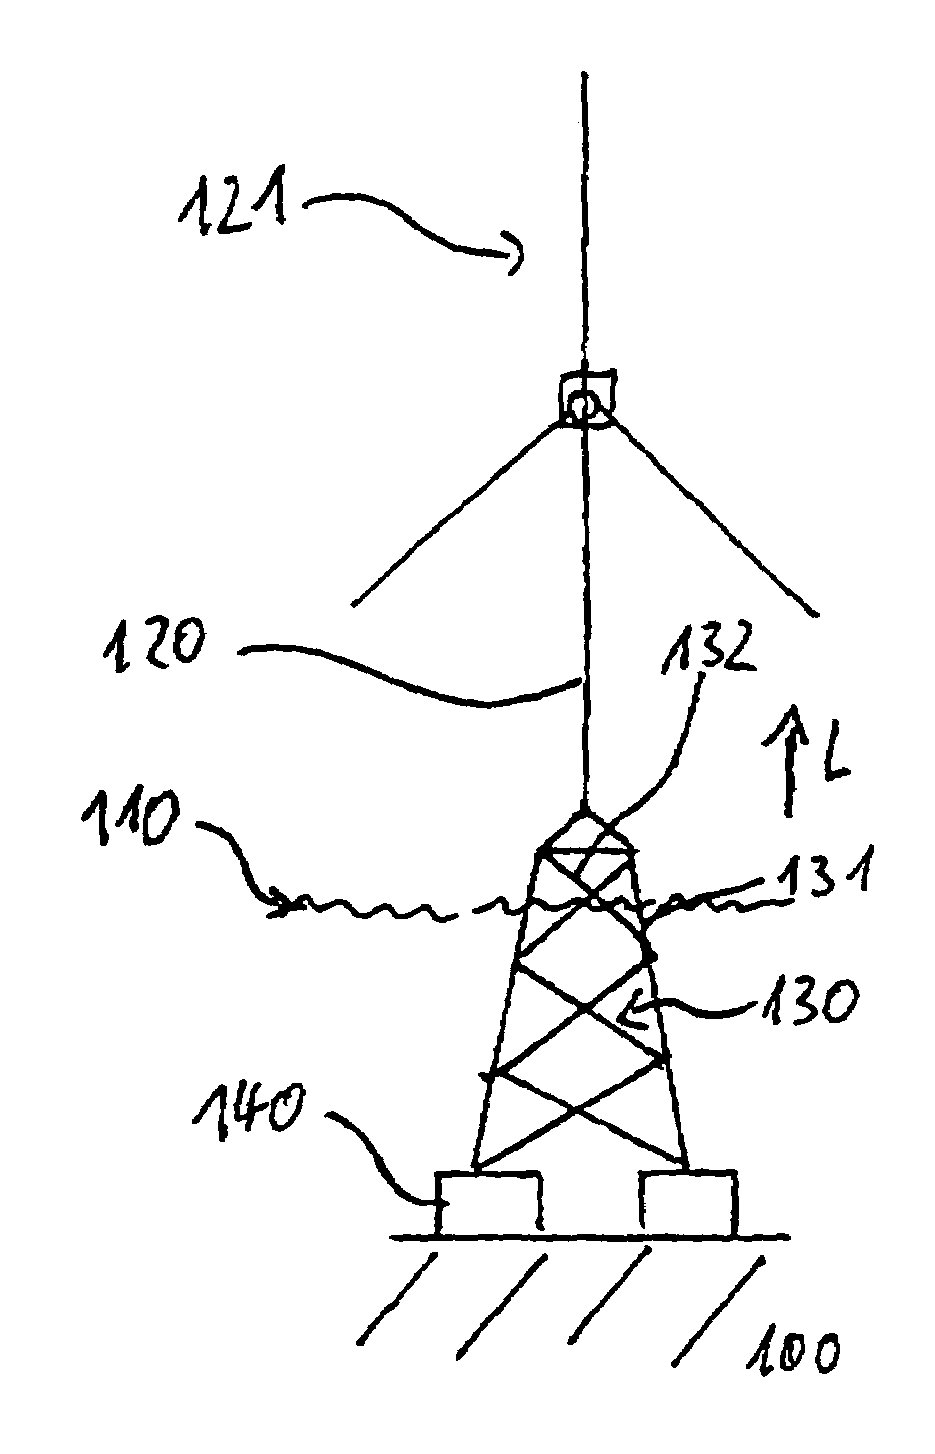 Offshore wind energy system with non-skid feet